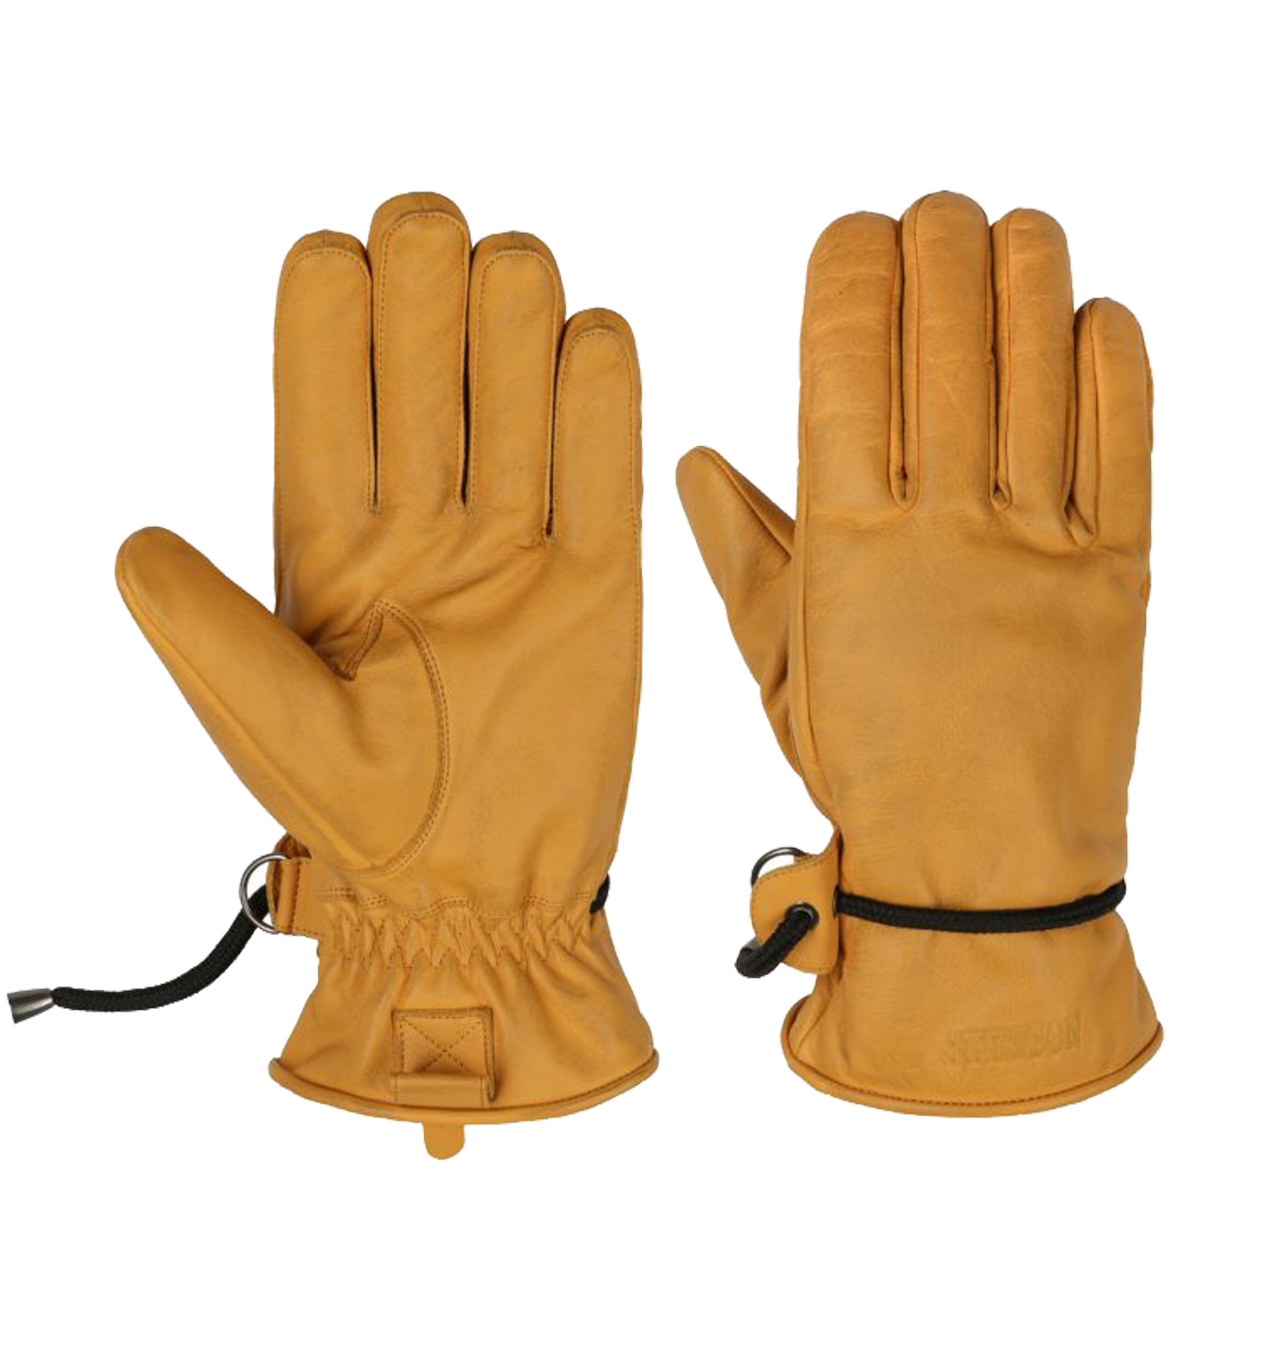 Stetson - Cowhide Leather Gloves - Yellow